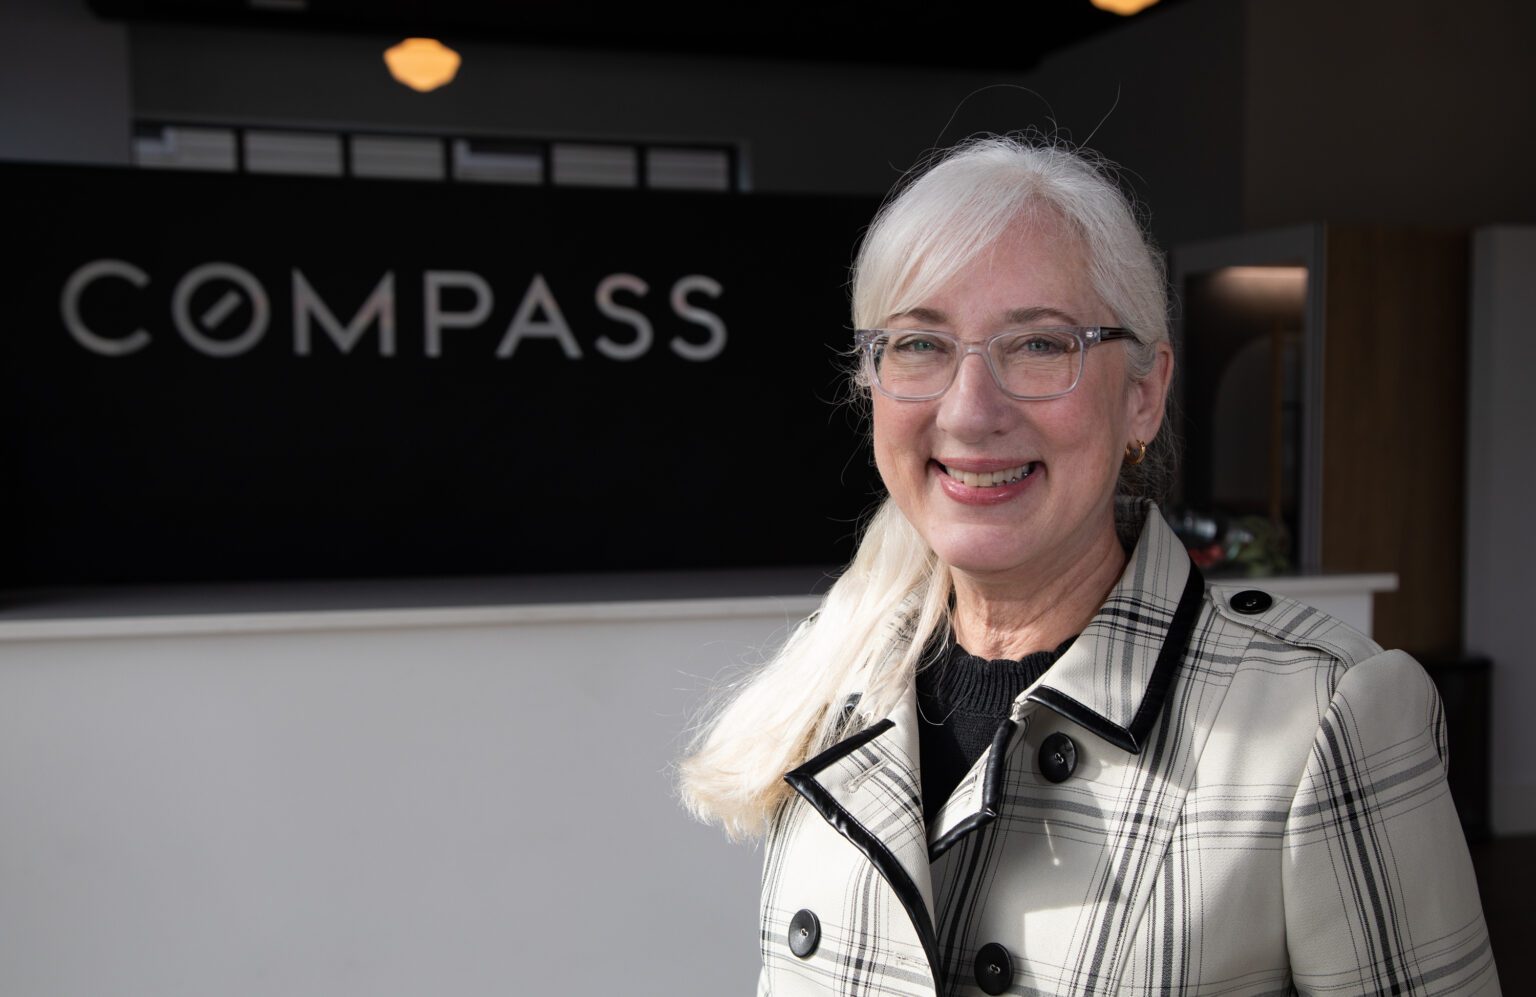 A woman with glasses and a plaid jacket poses for a photo smiling in front of a wall that reads "Compass."